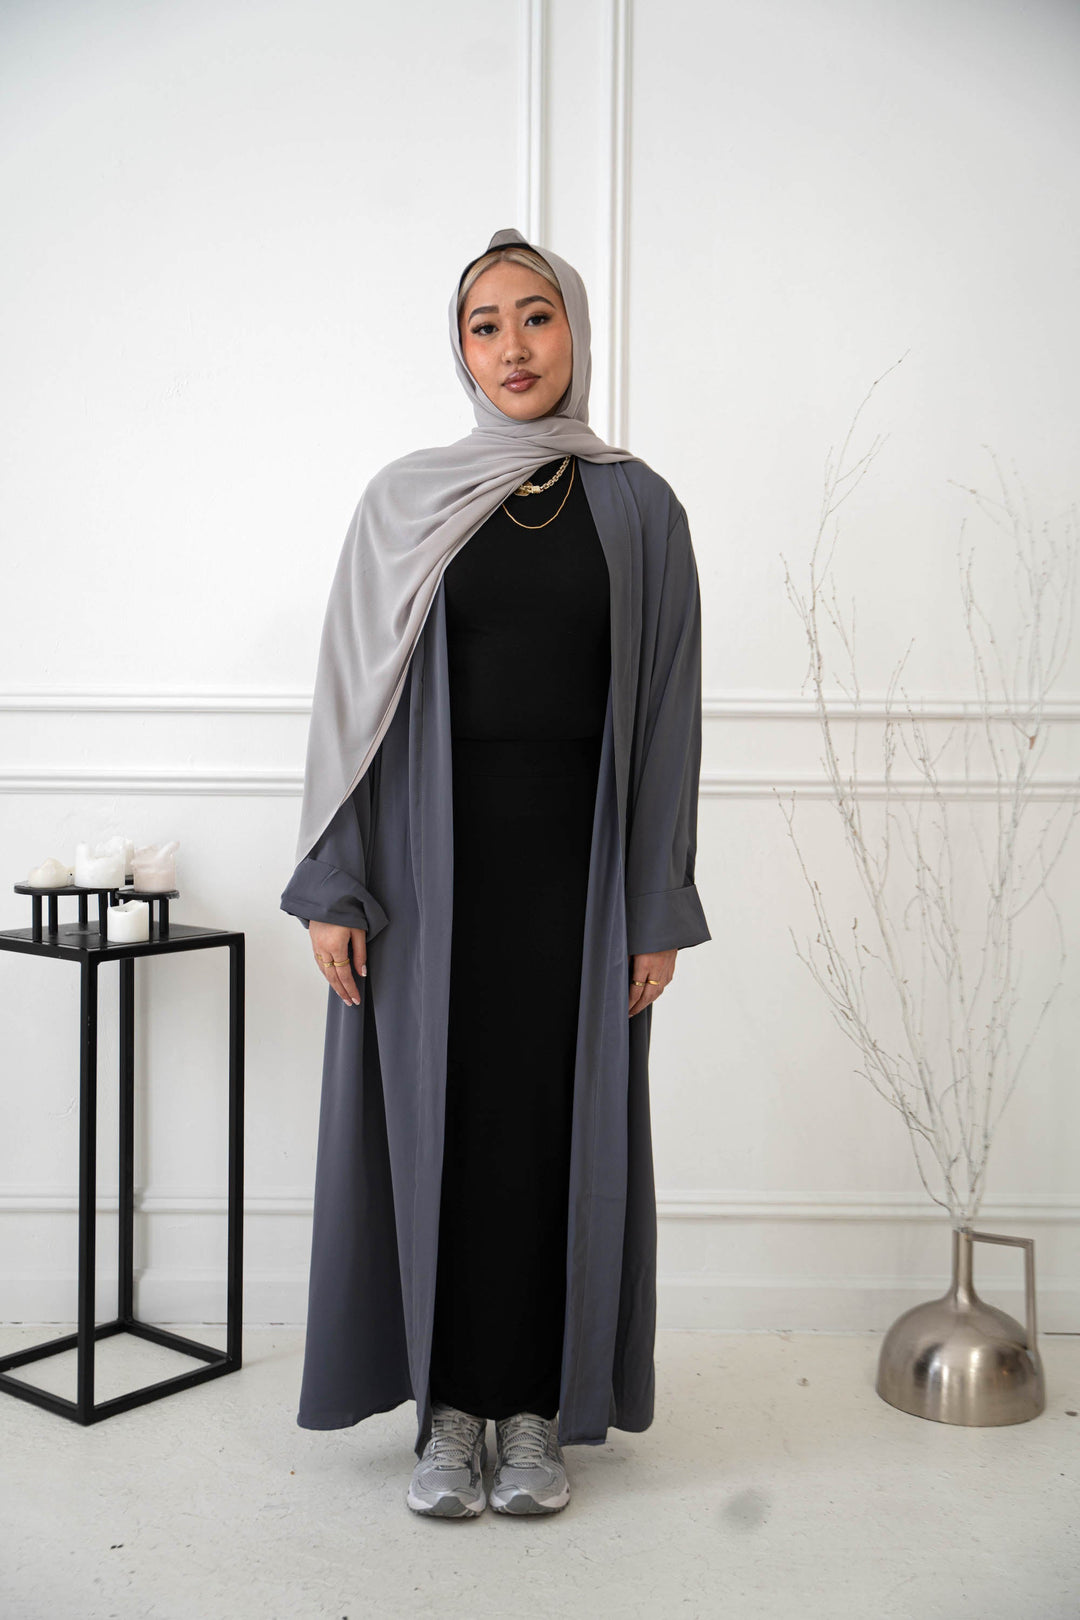 a woman in a black dress and a gray shawl